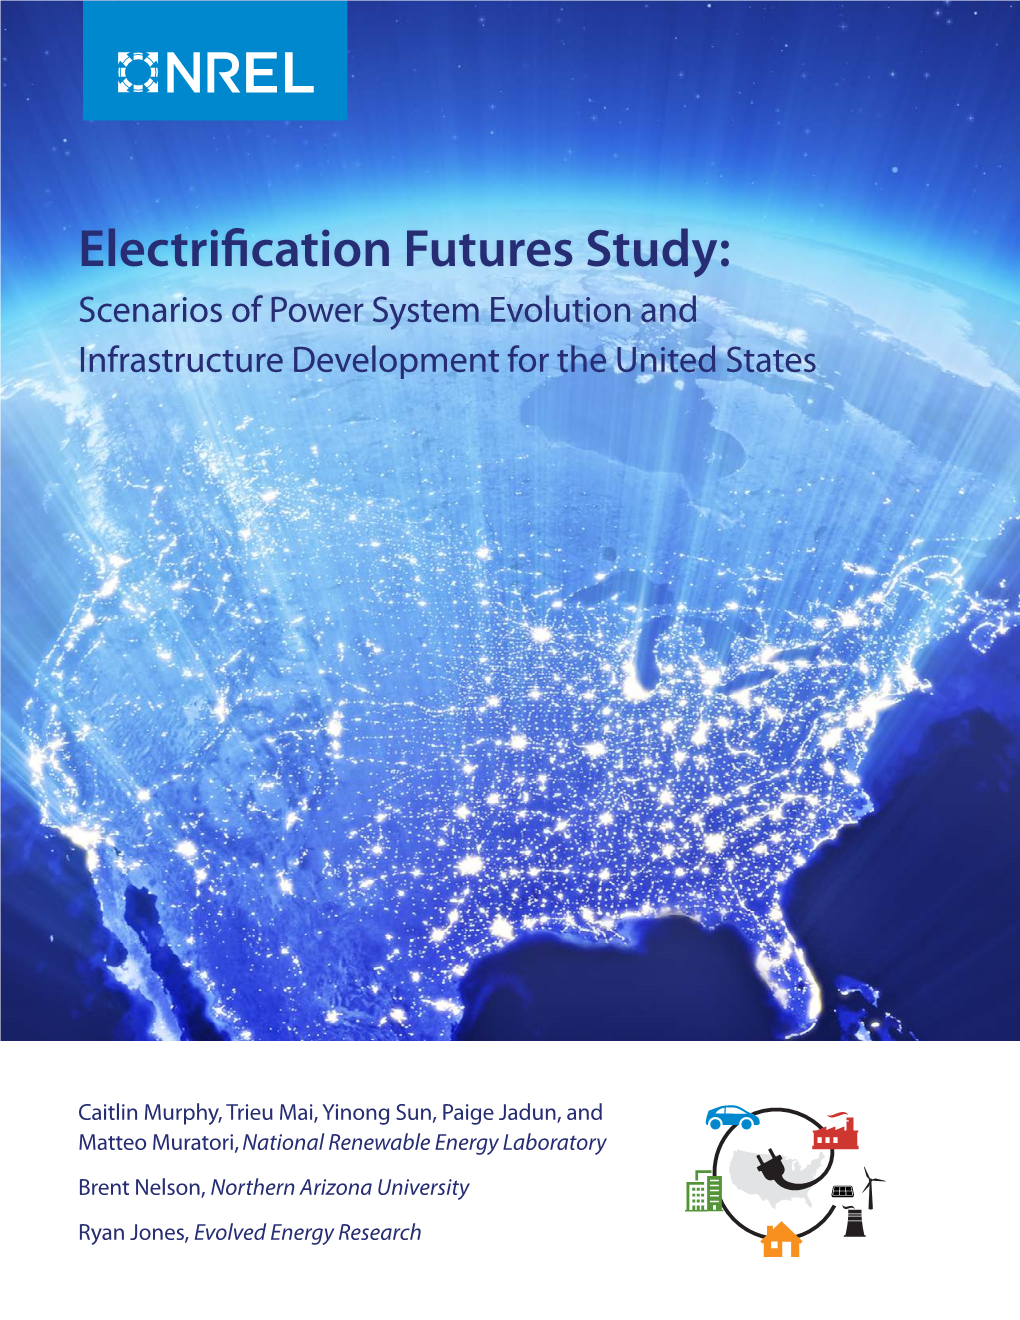 Electrification Futures Study: Scenarios of Power System Evolution and Infrastructure Development for the United States